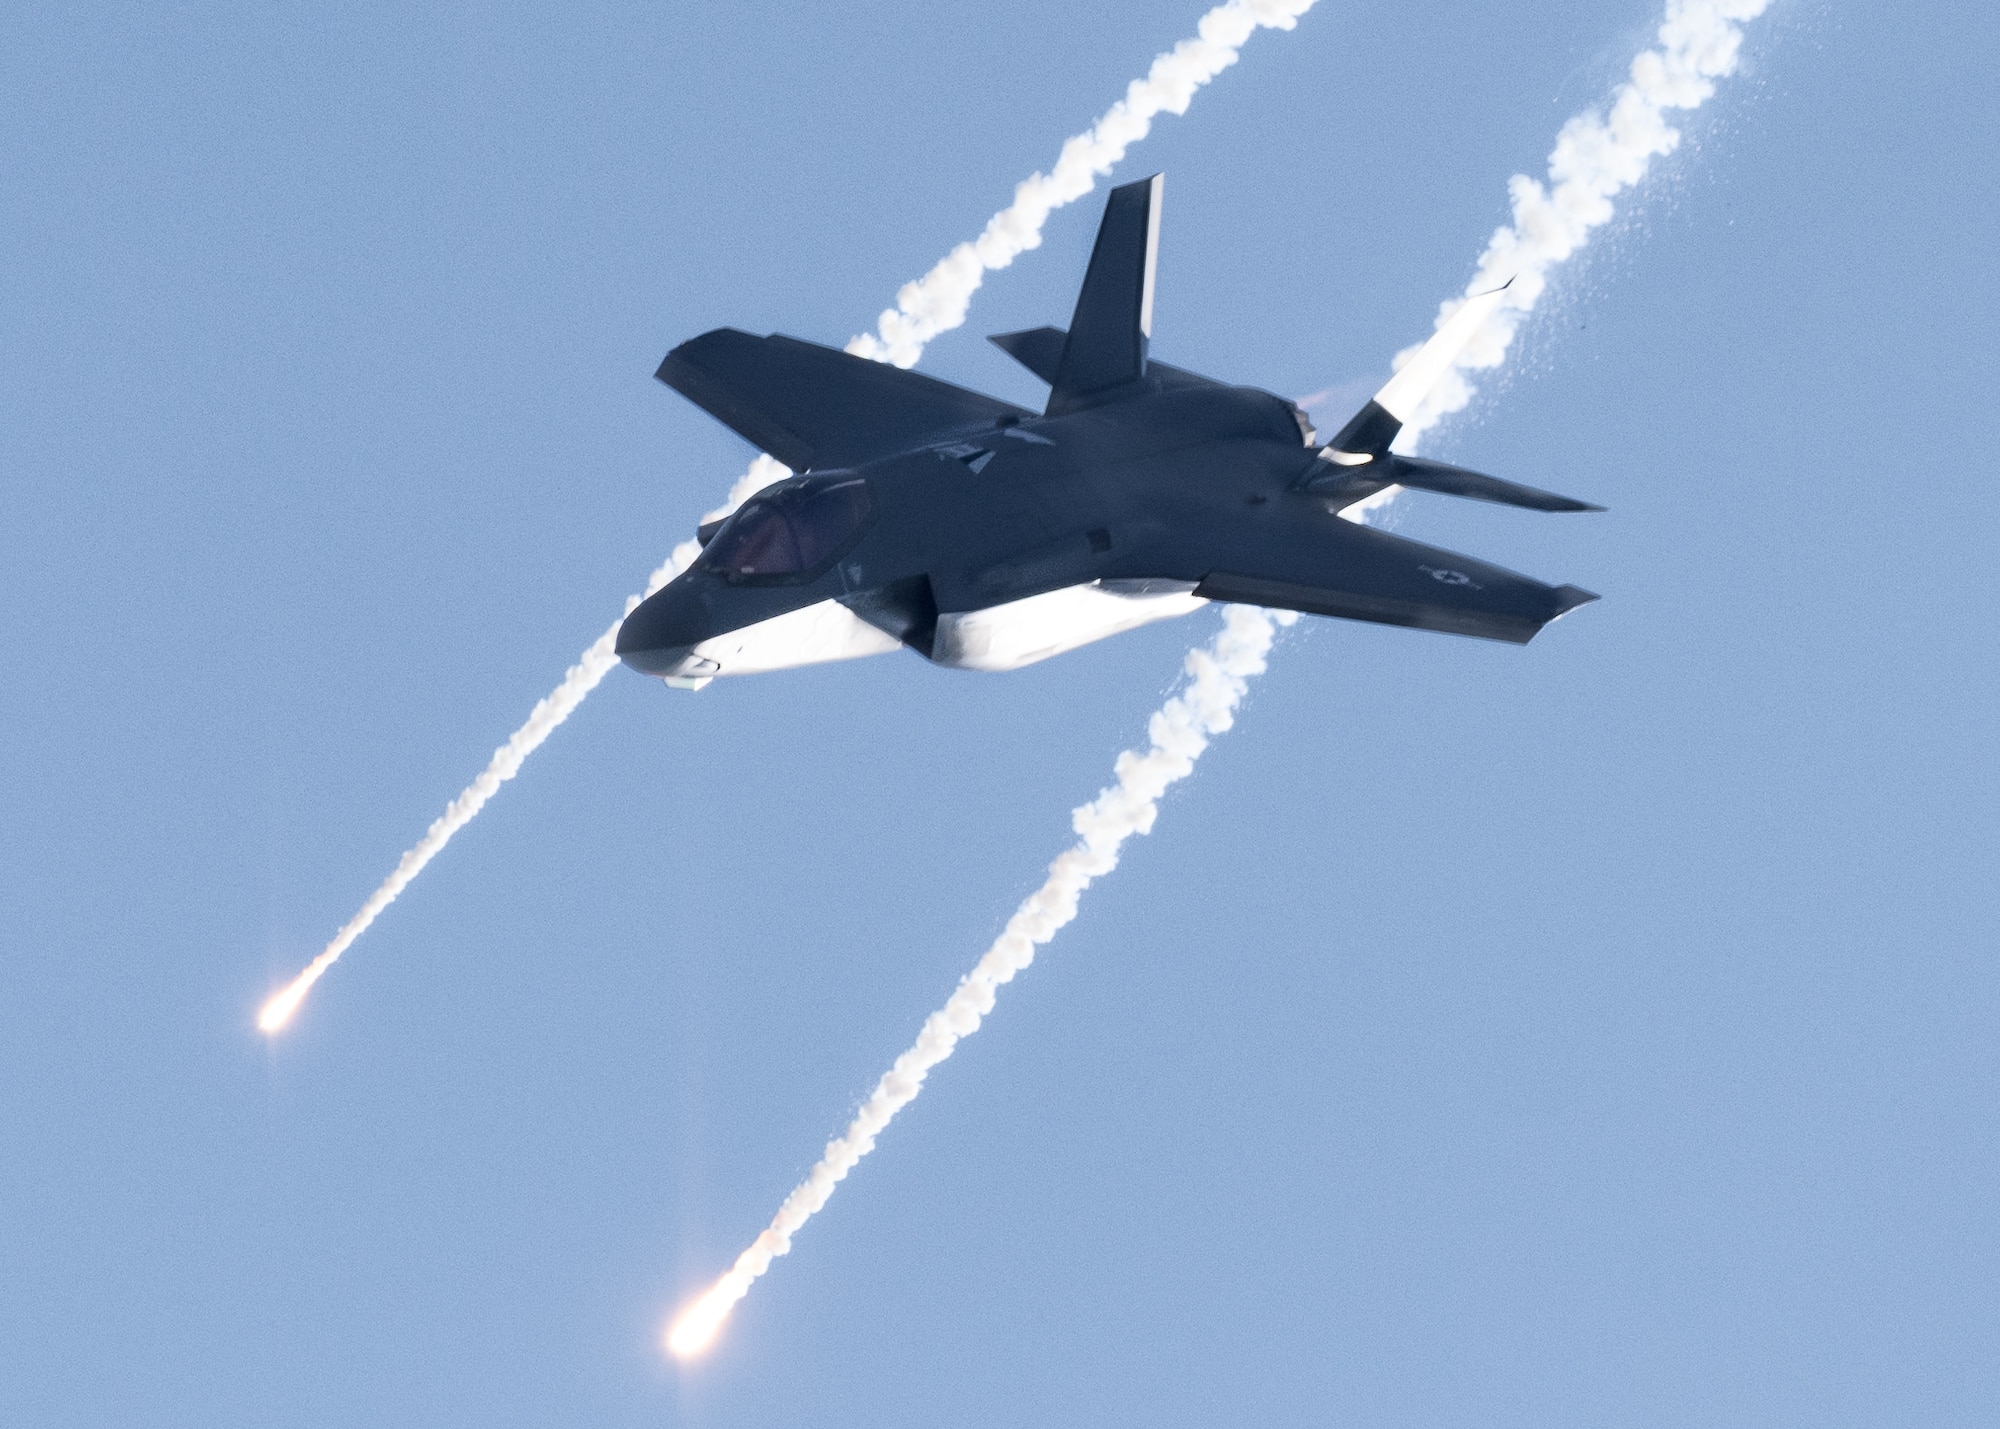 U.S. Air Force Maj. Kristin "BEO" Wolfe, F-35A Lightning II Demonstration Team pilot and commander, deploys flares during a demonstration rehearsal at the Pacific Air Show, Oct. 1, 2021, Huntington Beach, Calif.